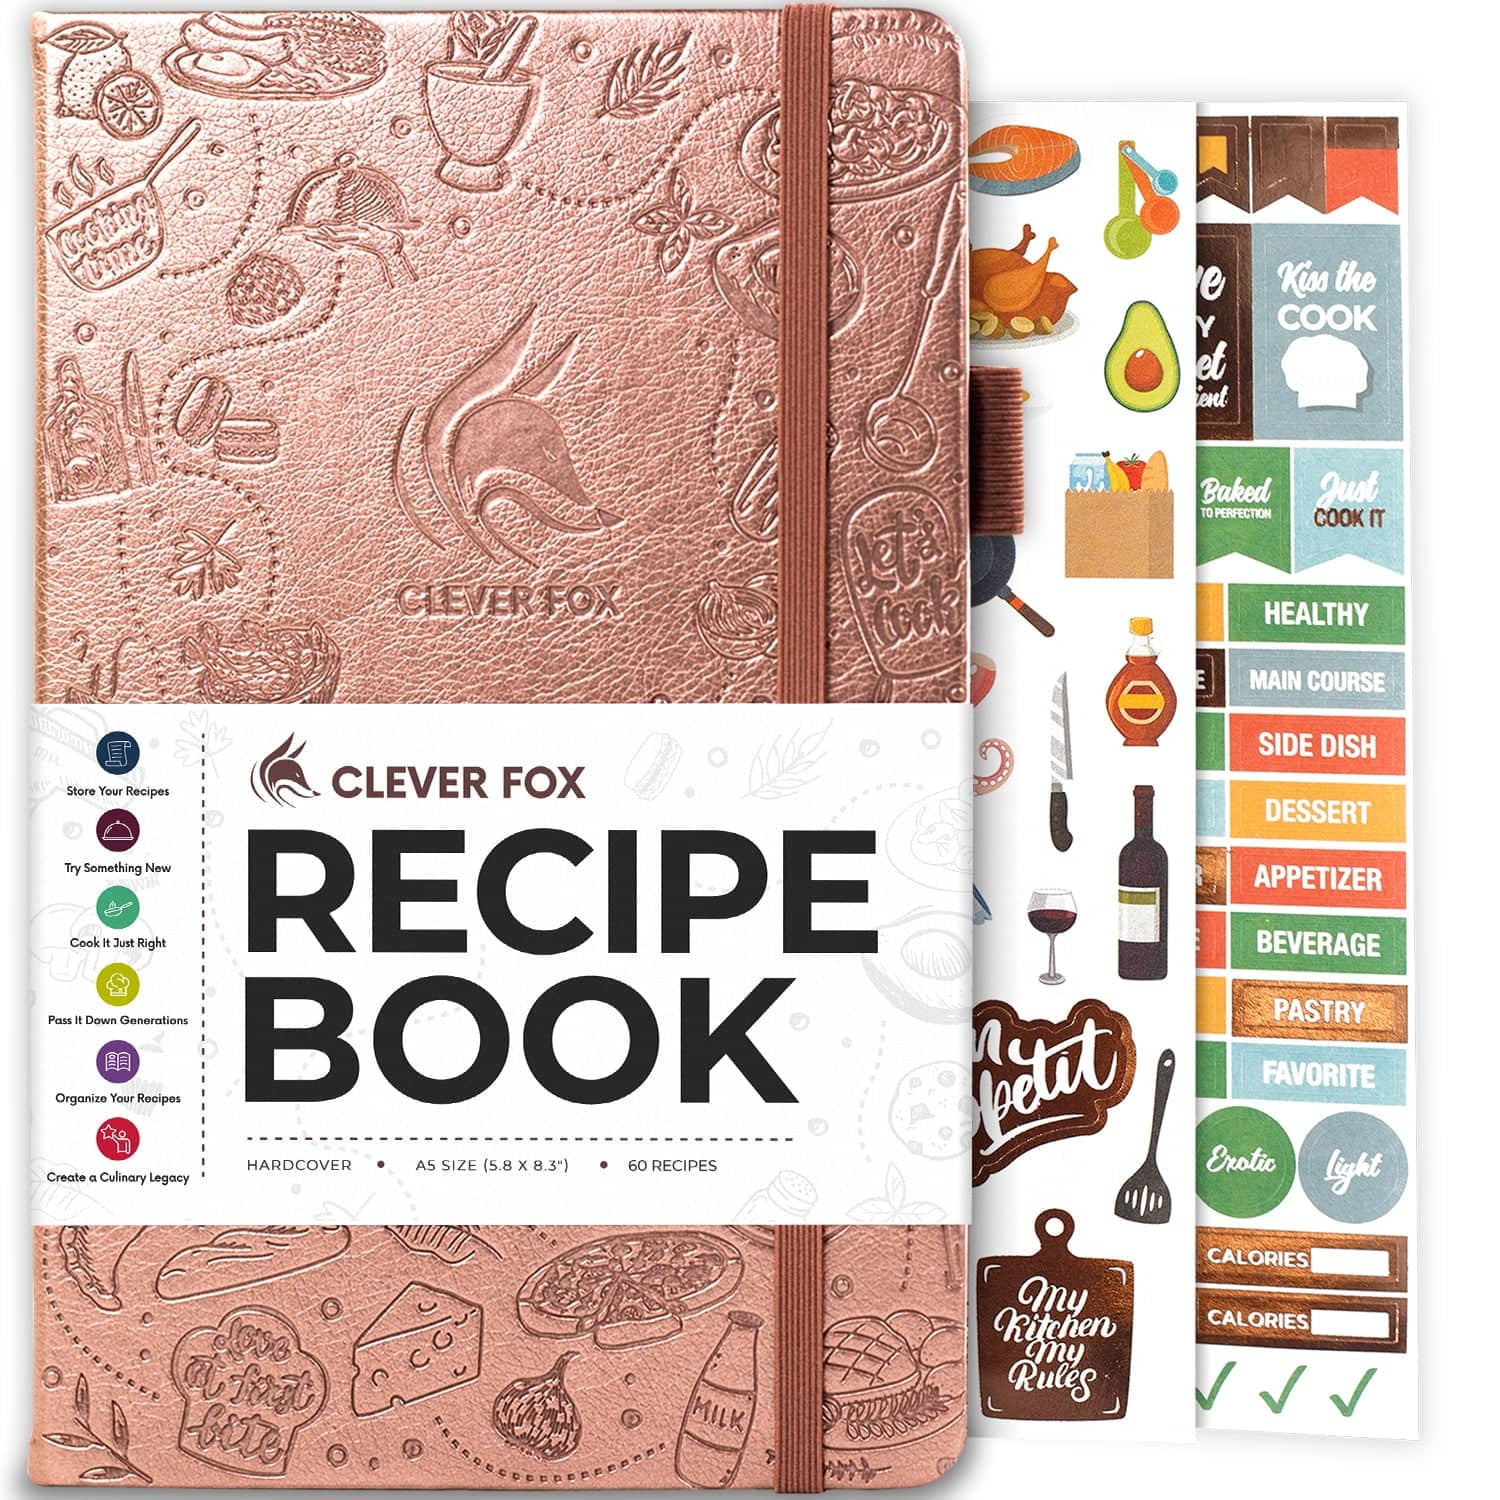 A5 PERSONALISED RECIPE PLANNER, WRITE YOUR OWN RECIPES,HEALTHY